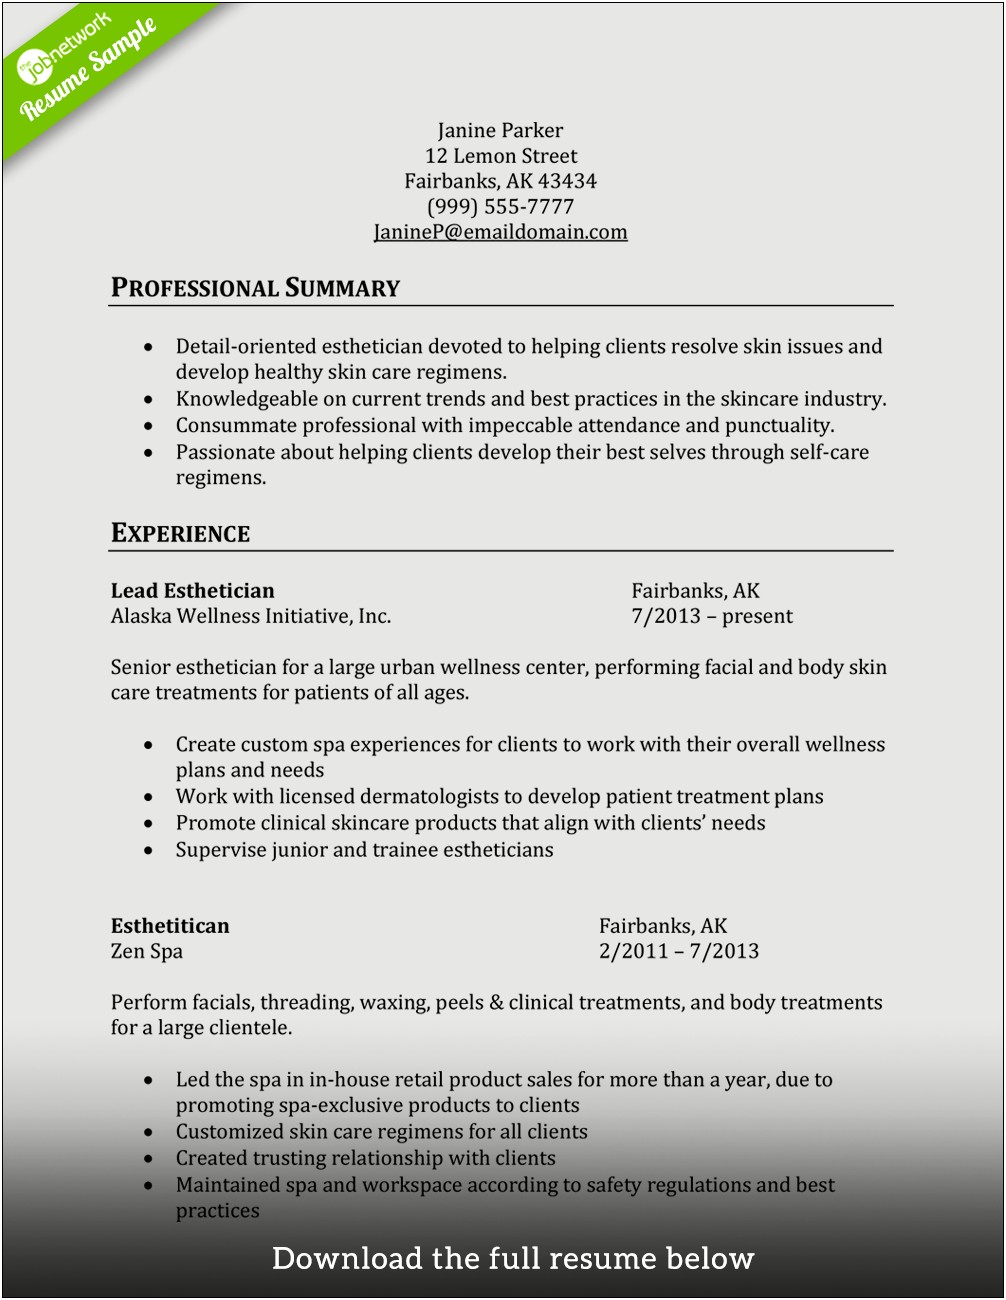 Cosmetology Resume Objective Statement Examples